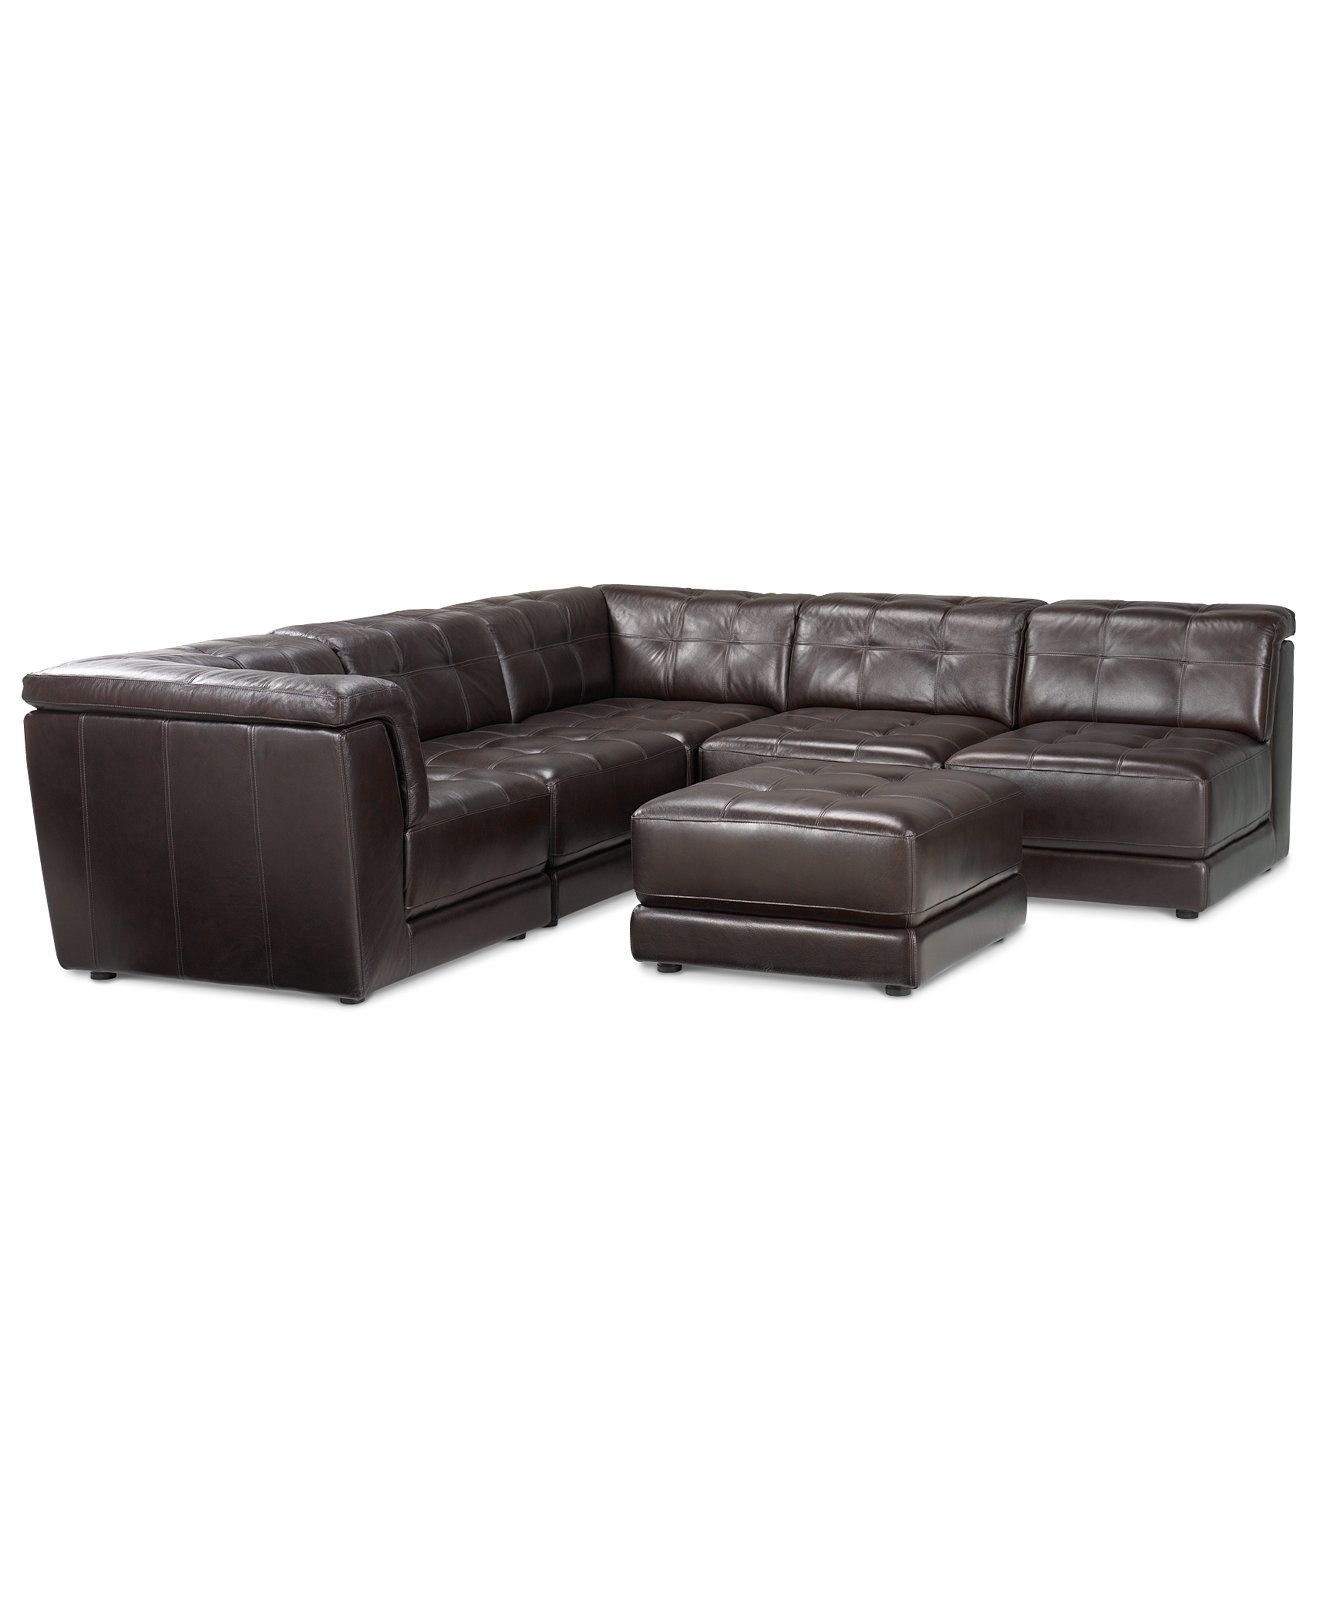 Stacey Leather 6 Piece Modular Sectional Sofa (3 Armless Chairs, 2 With Latest Leather Modular Sectional Sofas (View 16 of 20)